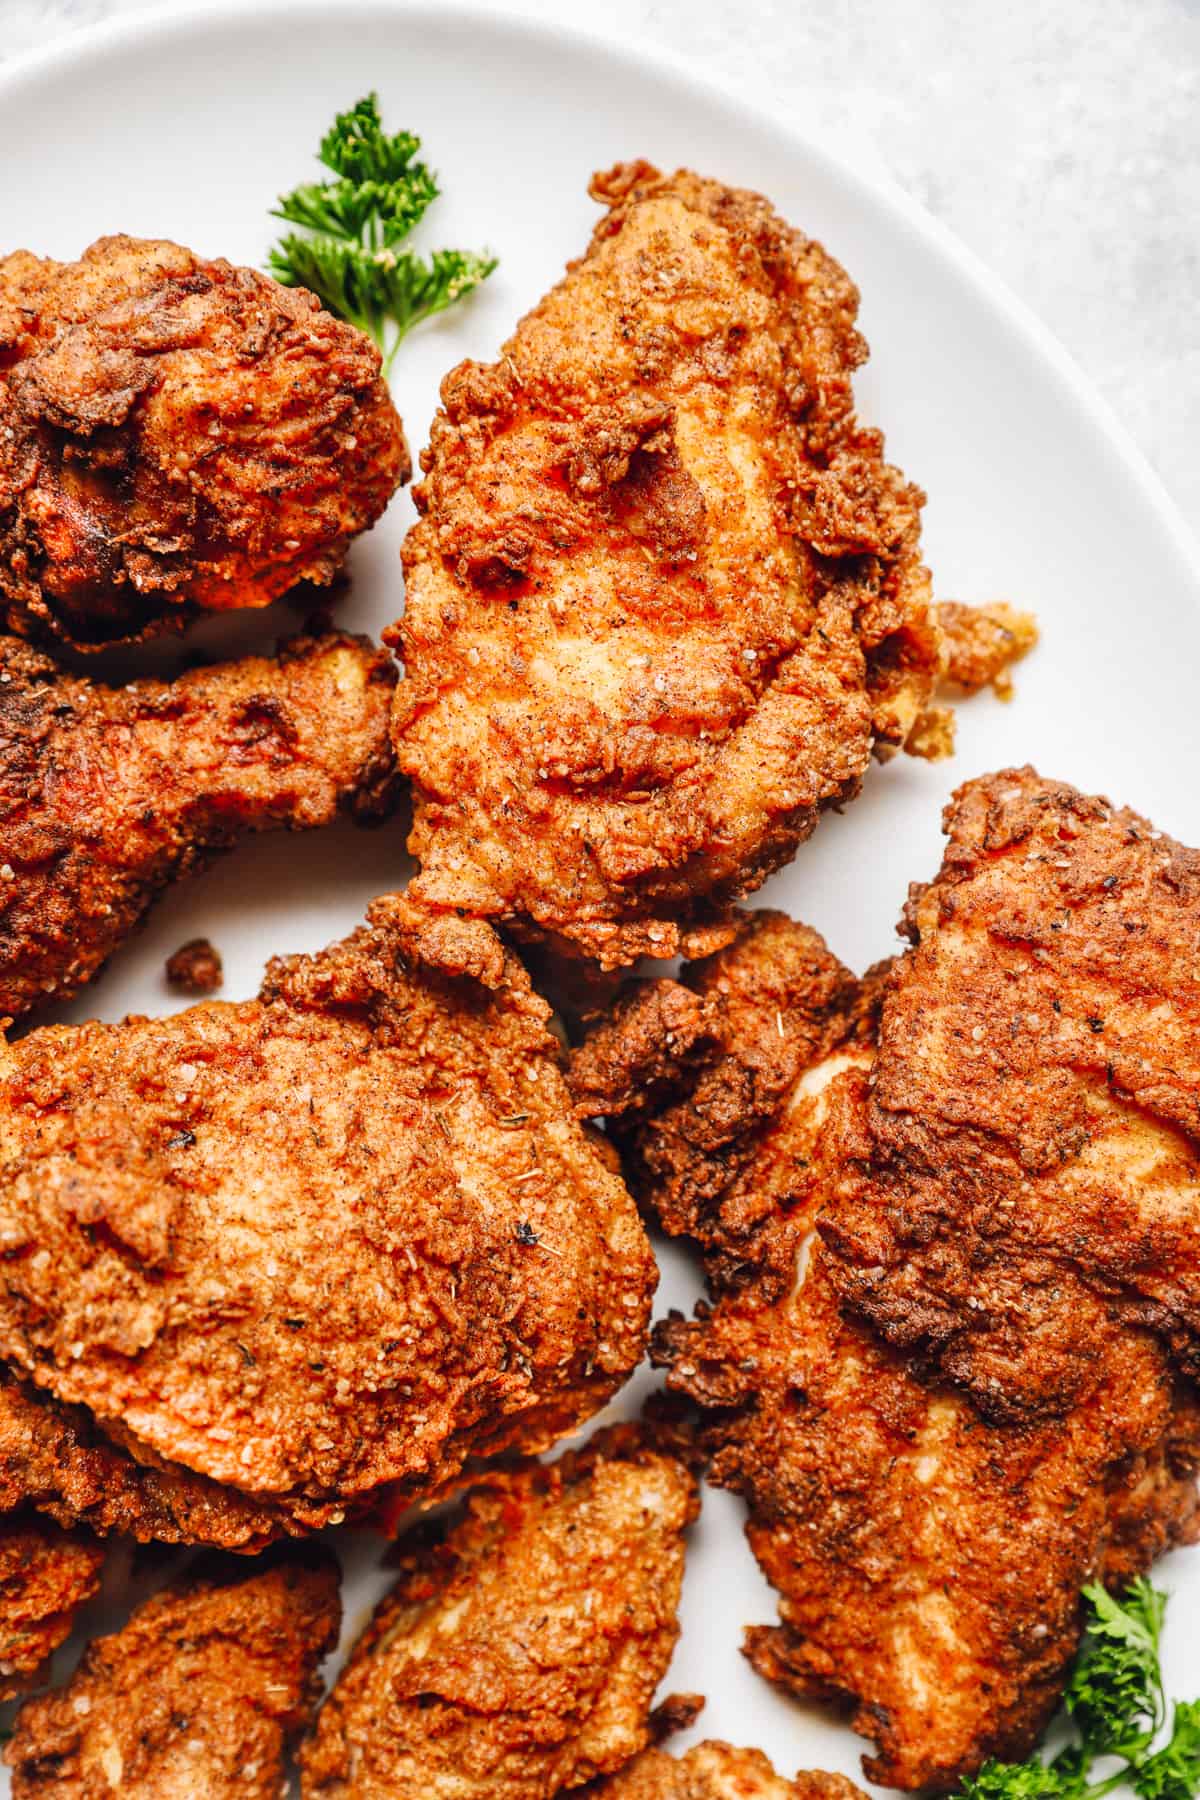 kentucky fried chicken thighs and legs on a white plate.